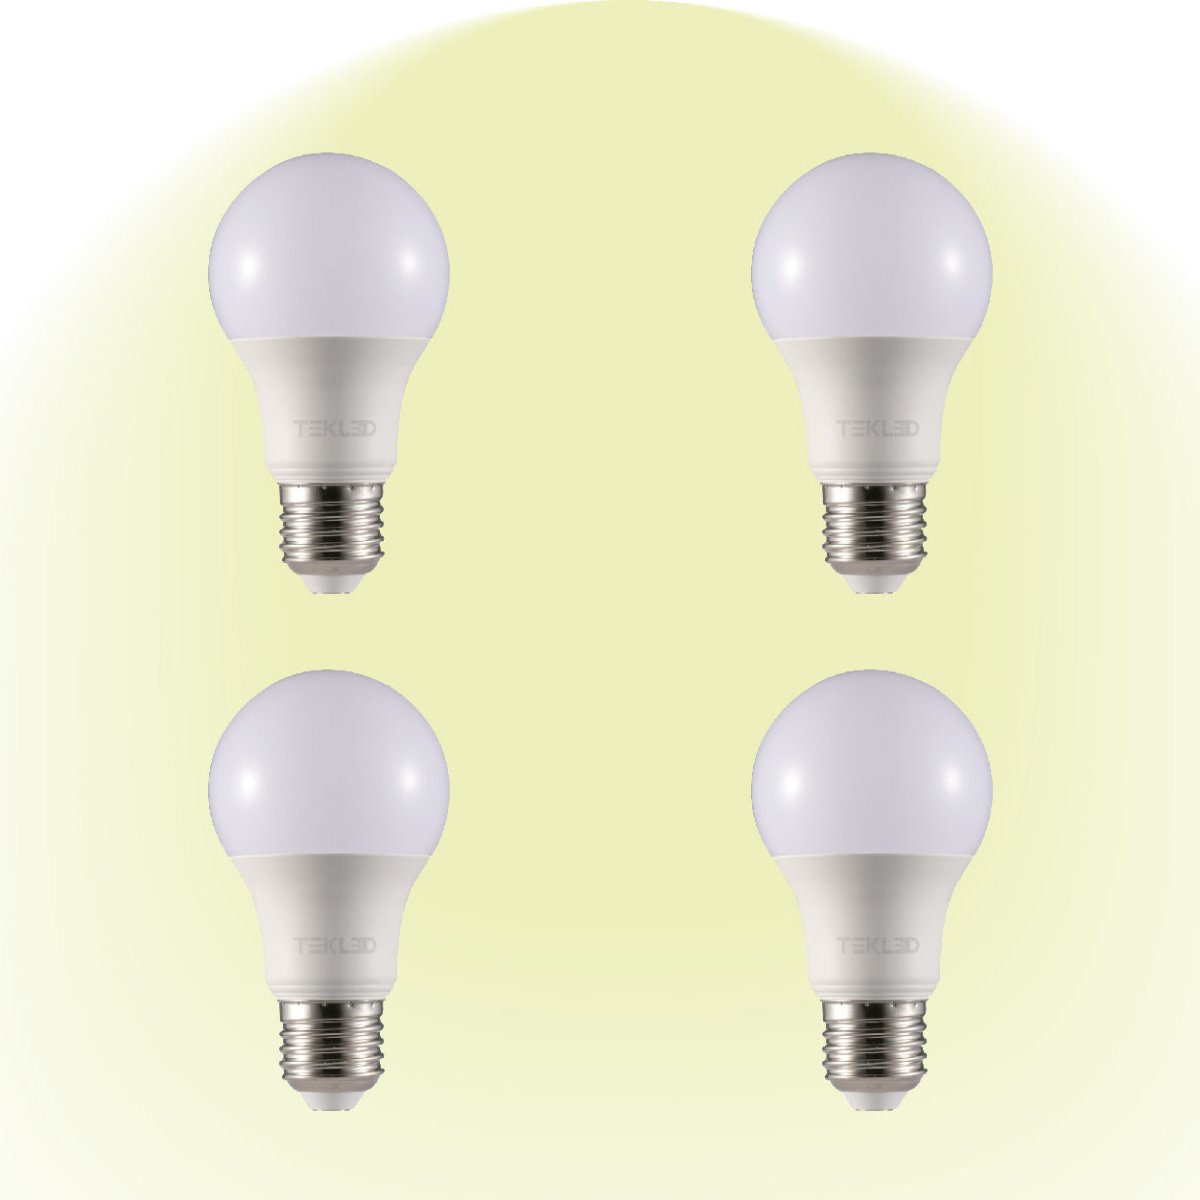 Virgo LED GLS Bulb A60 Dimmable E27 Edison Screw 4000K Cool White 7 W Pack of 4 527-156184